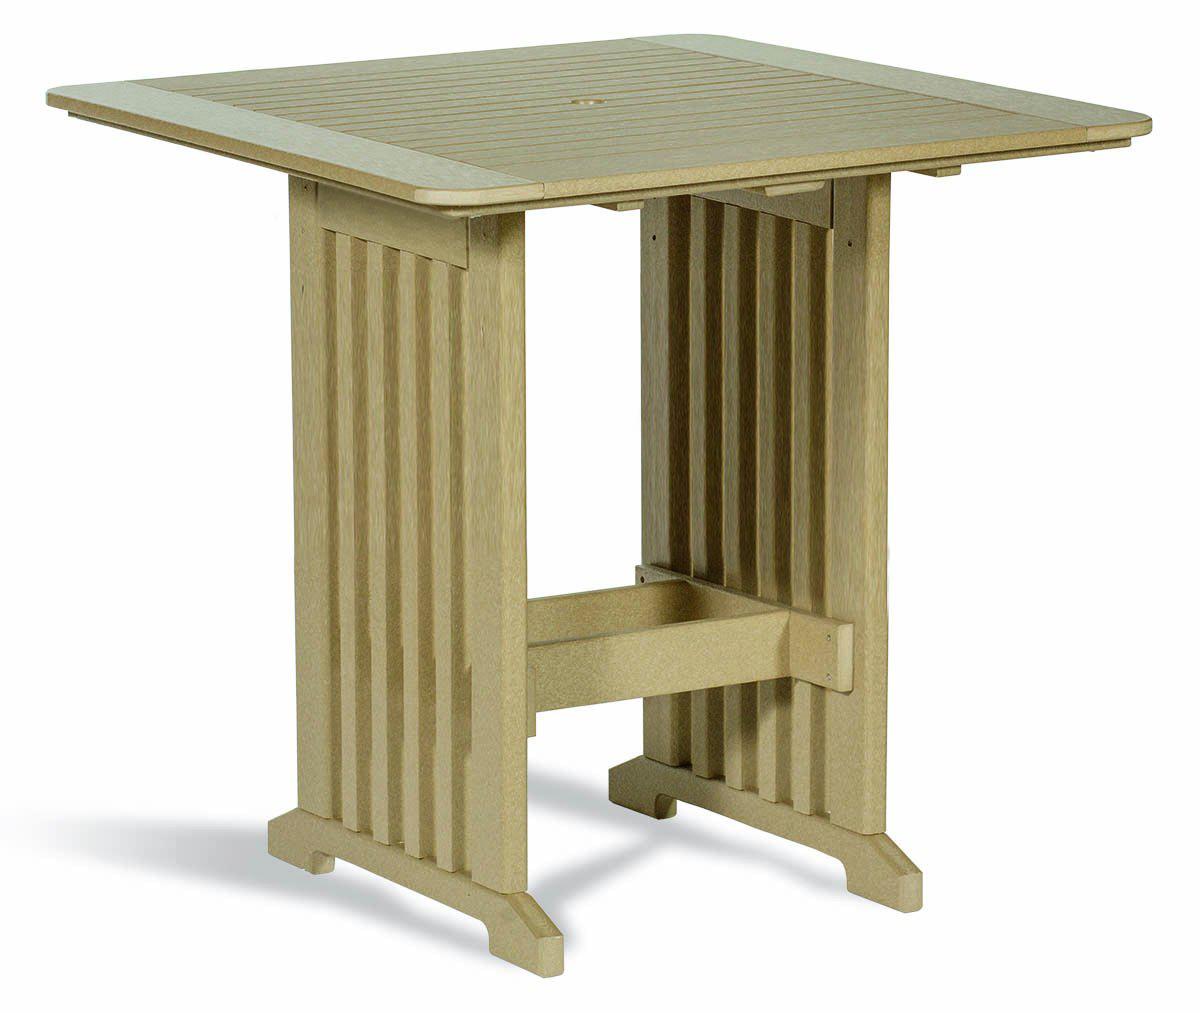 Leisure Lawns Bar Height Table and Chair Collection